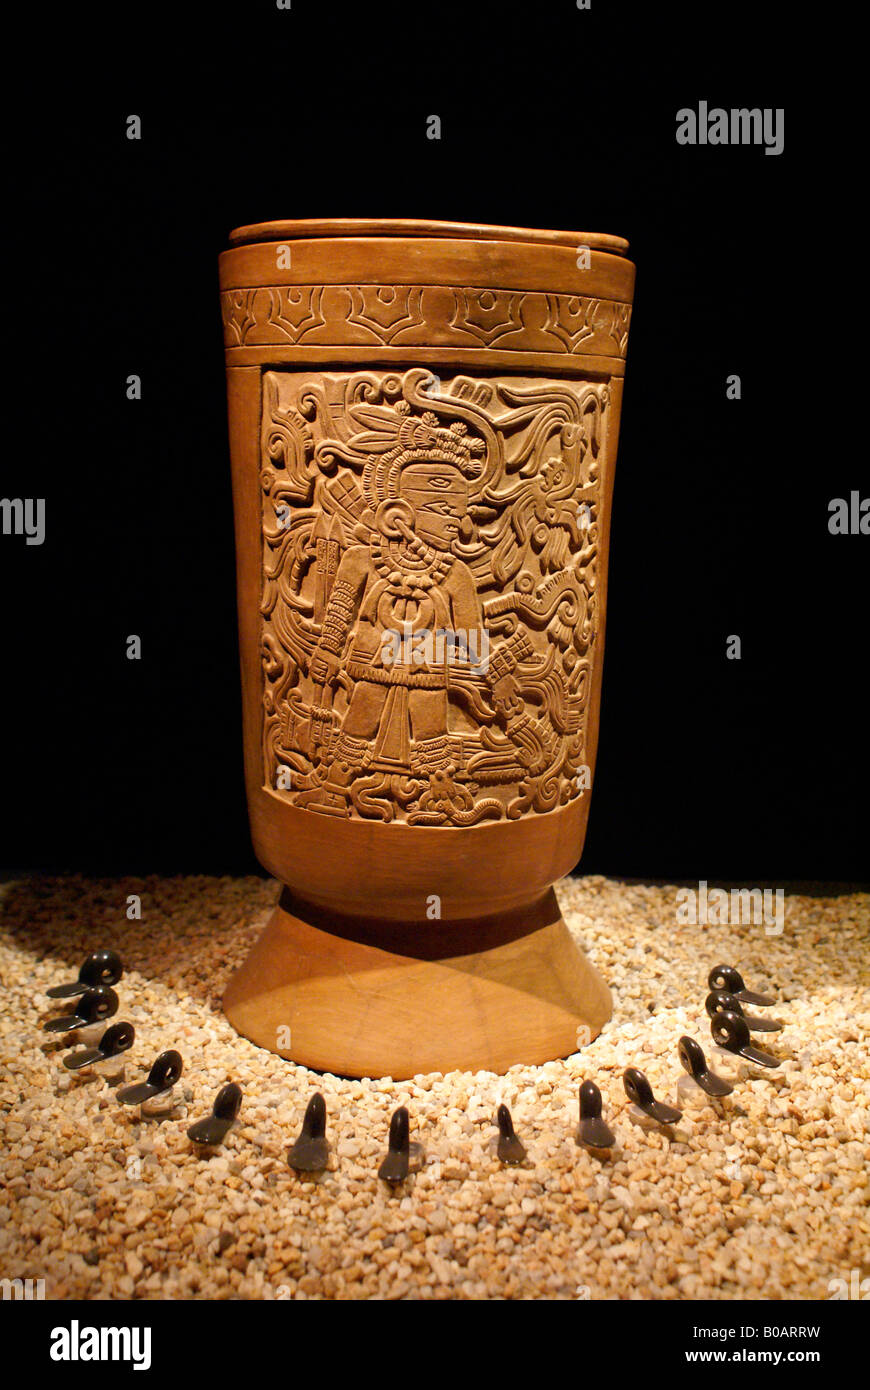 Aztec funerary urn on display at the Museo del Templo Mayor, Mexico City Stock Photo